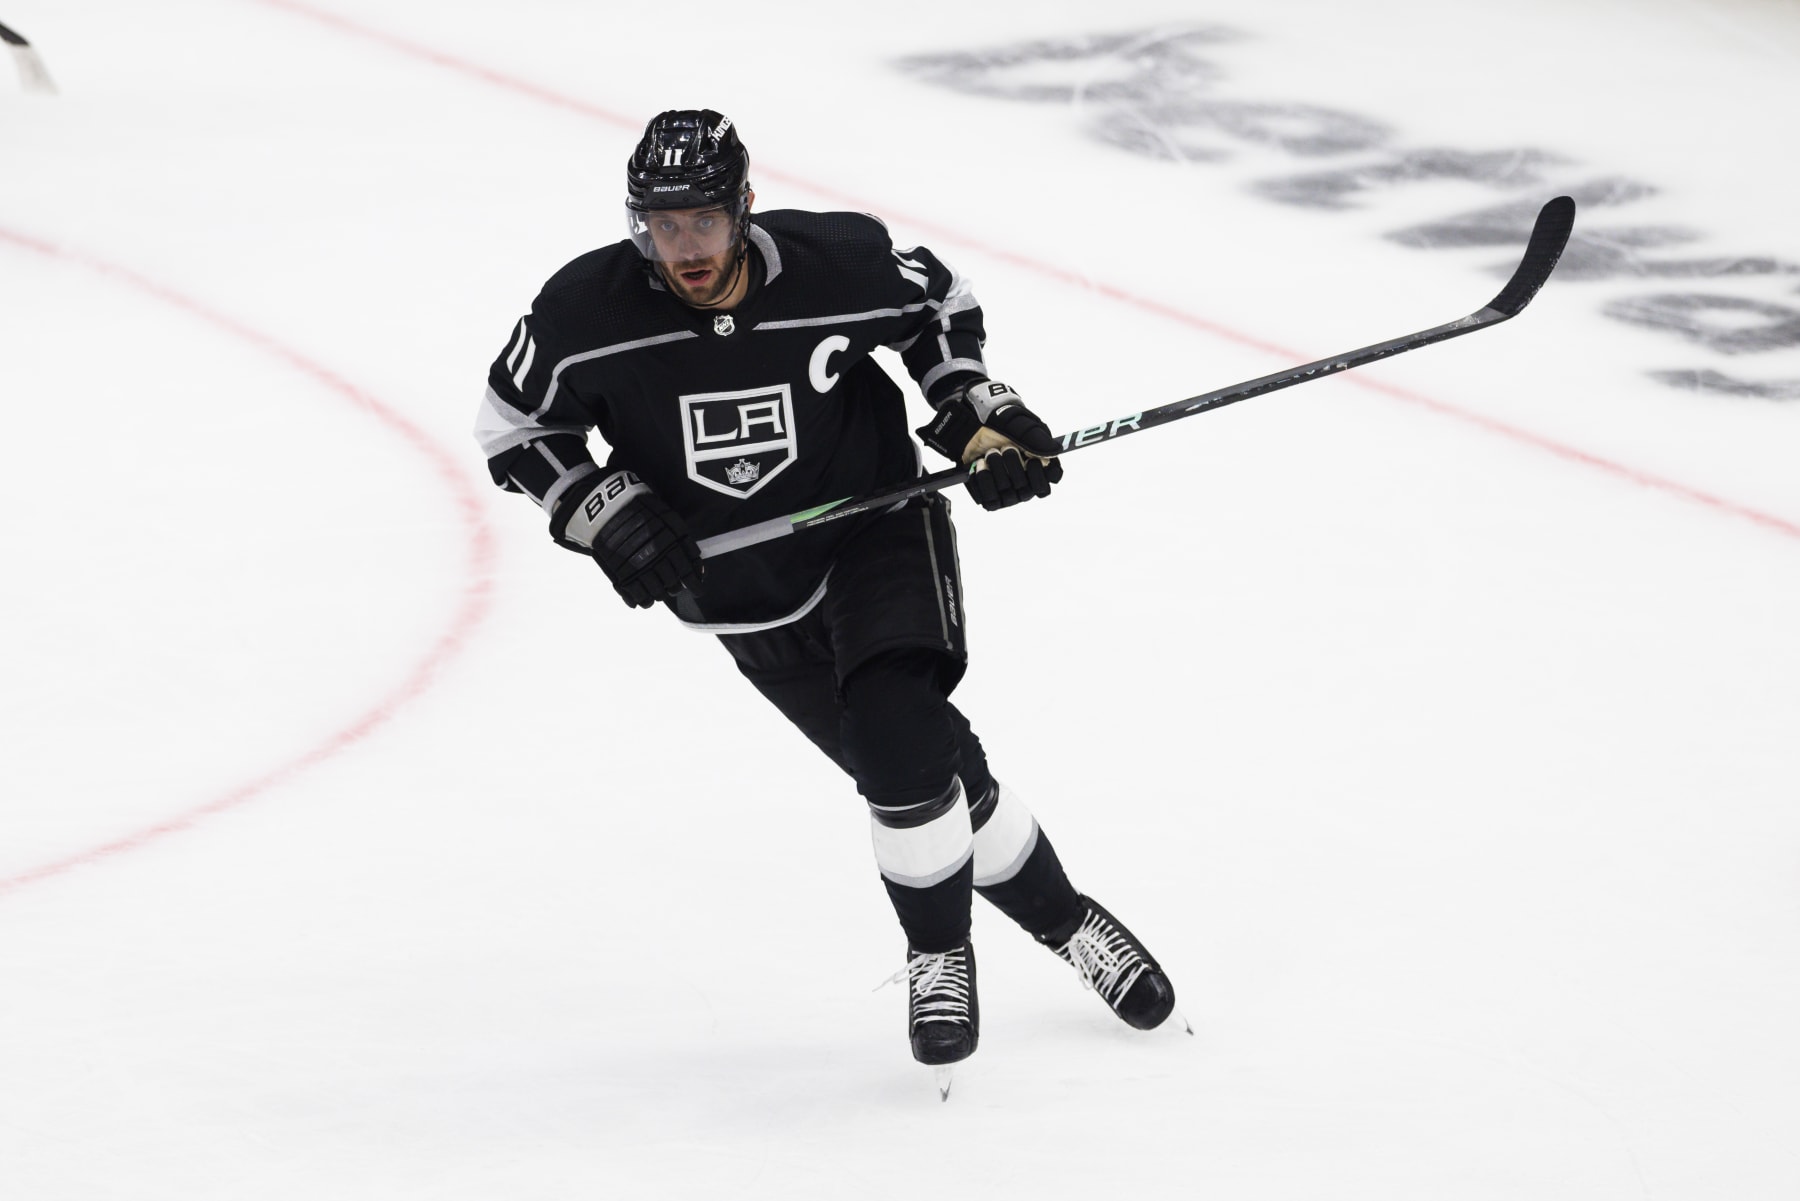 Luc Robitaille on Los Angeles Kings Captain Anze Kopitar - The